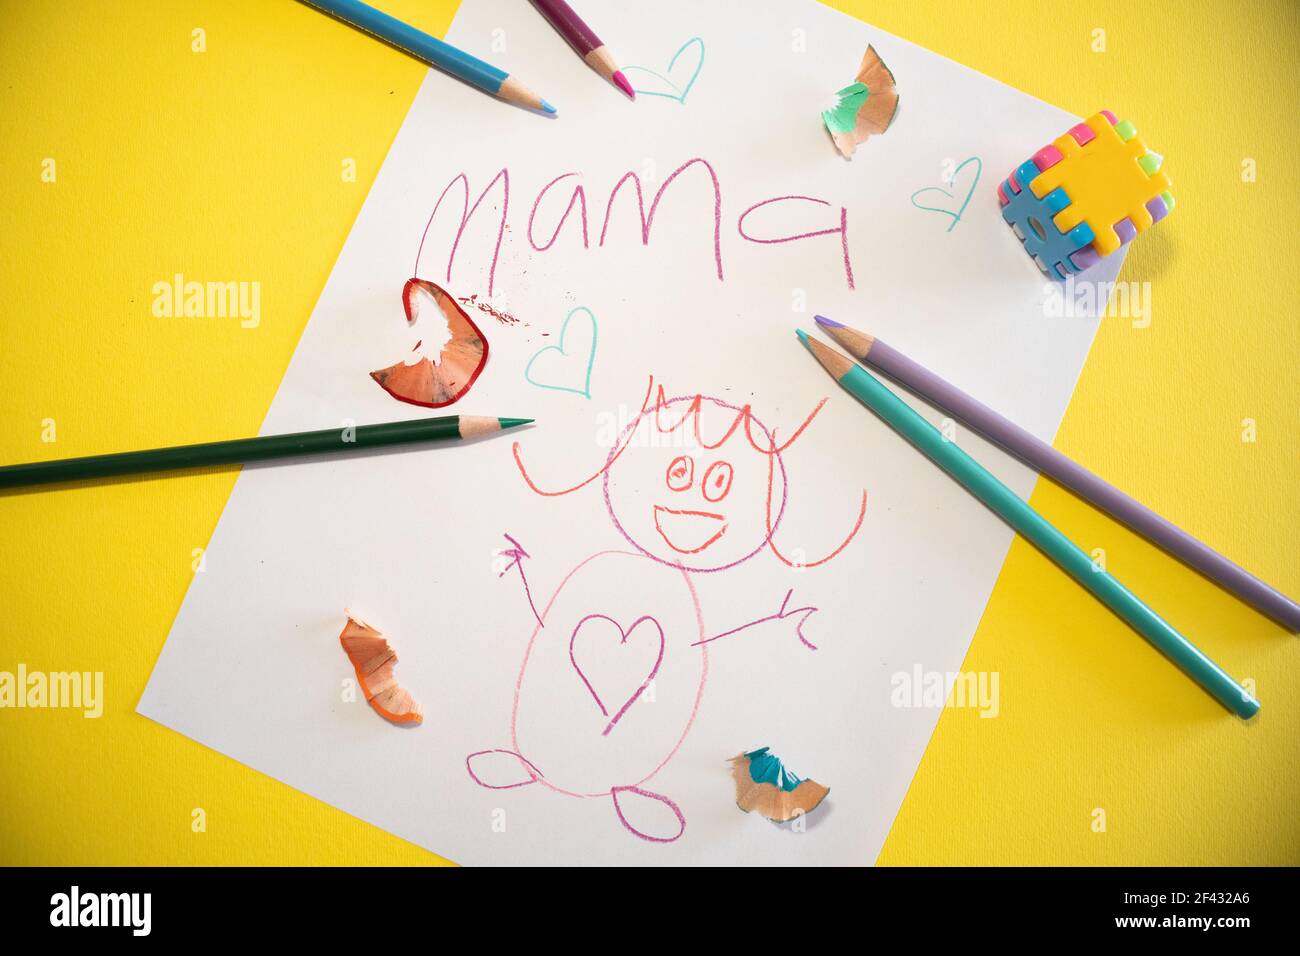 Colorful Drawing Spanish Mother S Day Card With Words Happy Mother S Day Stock Photo Alamy